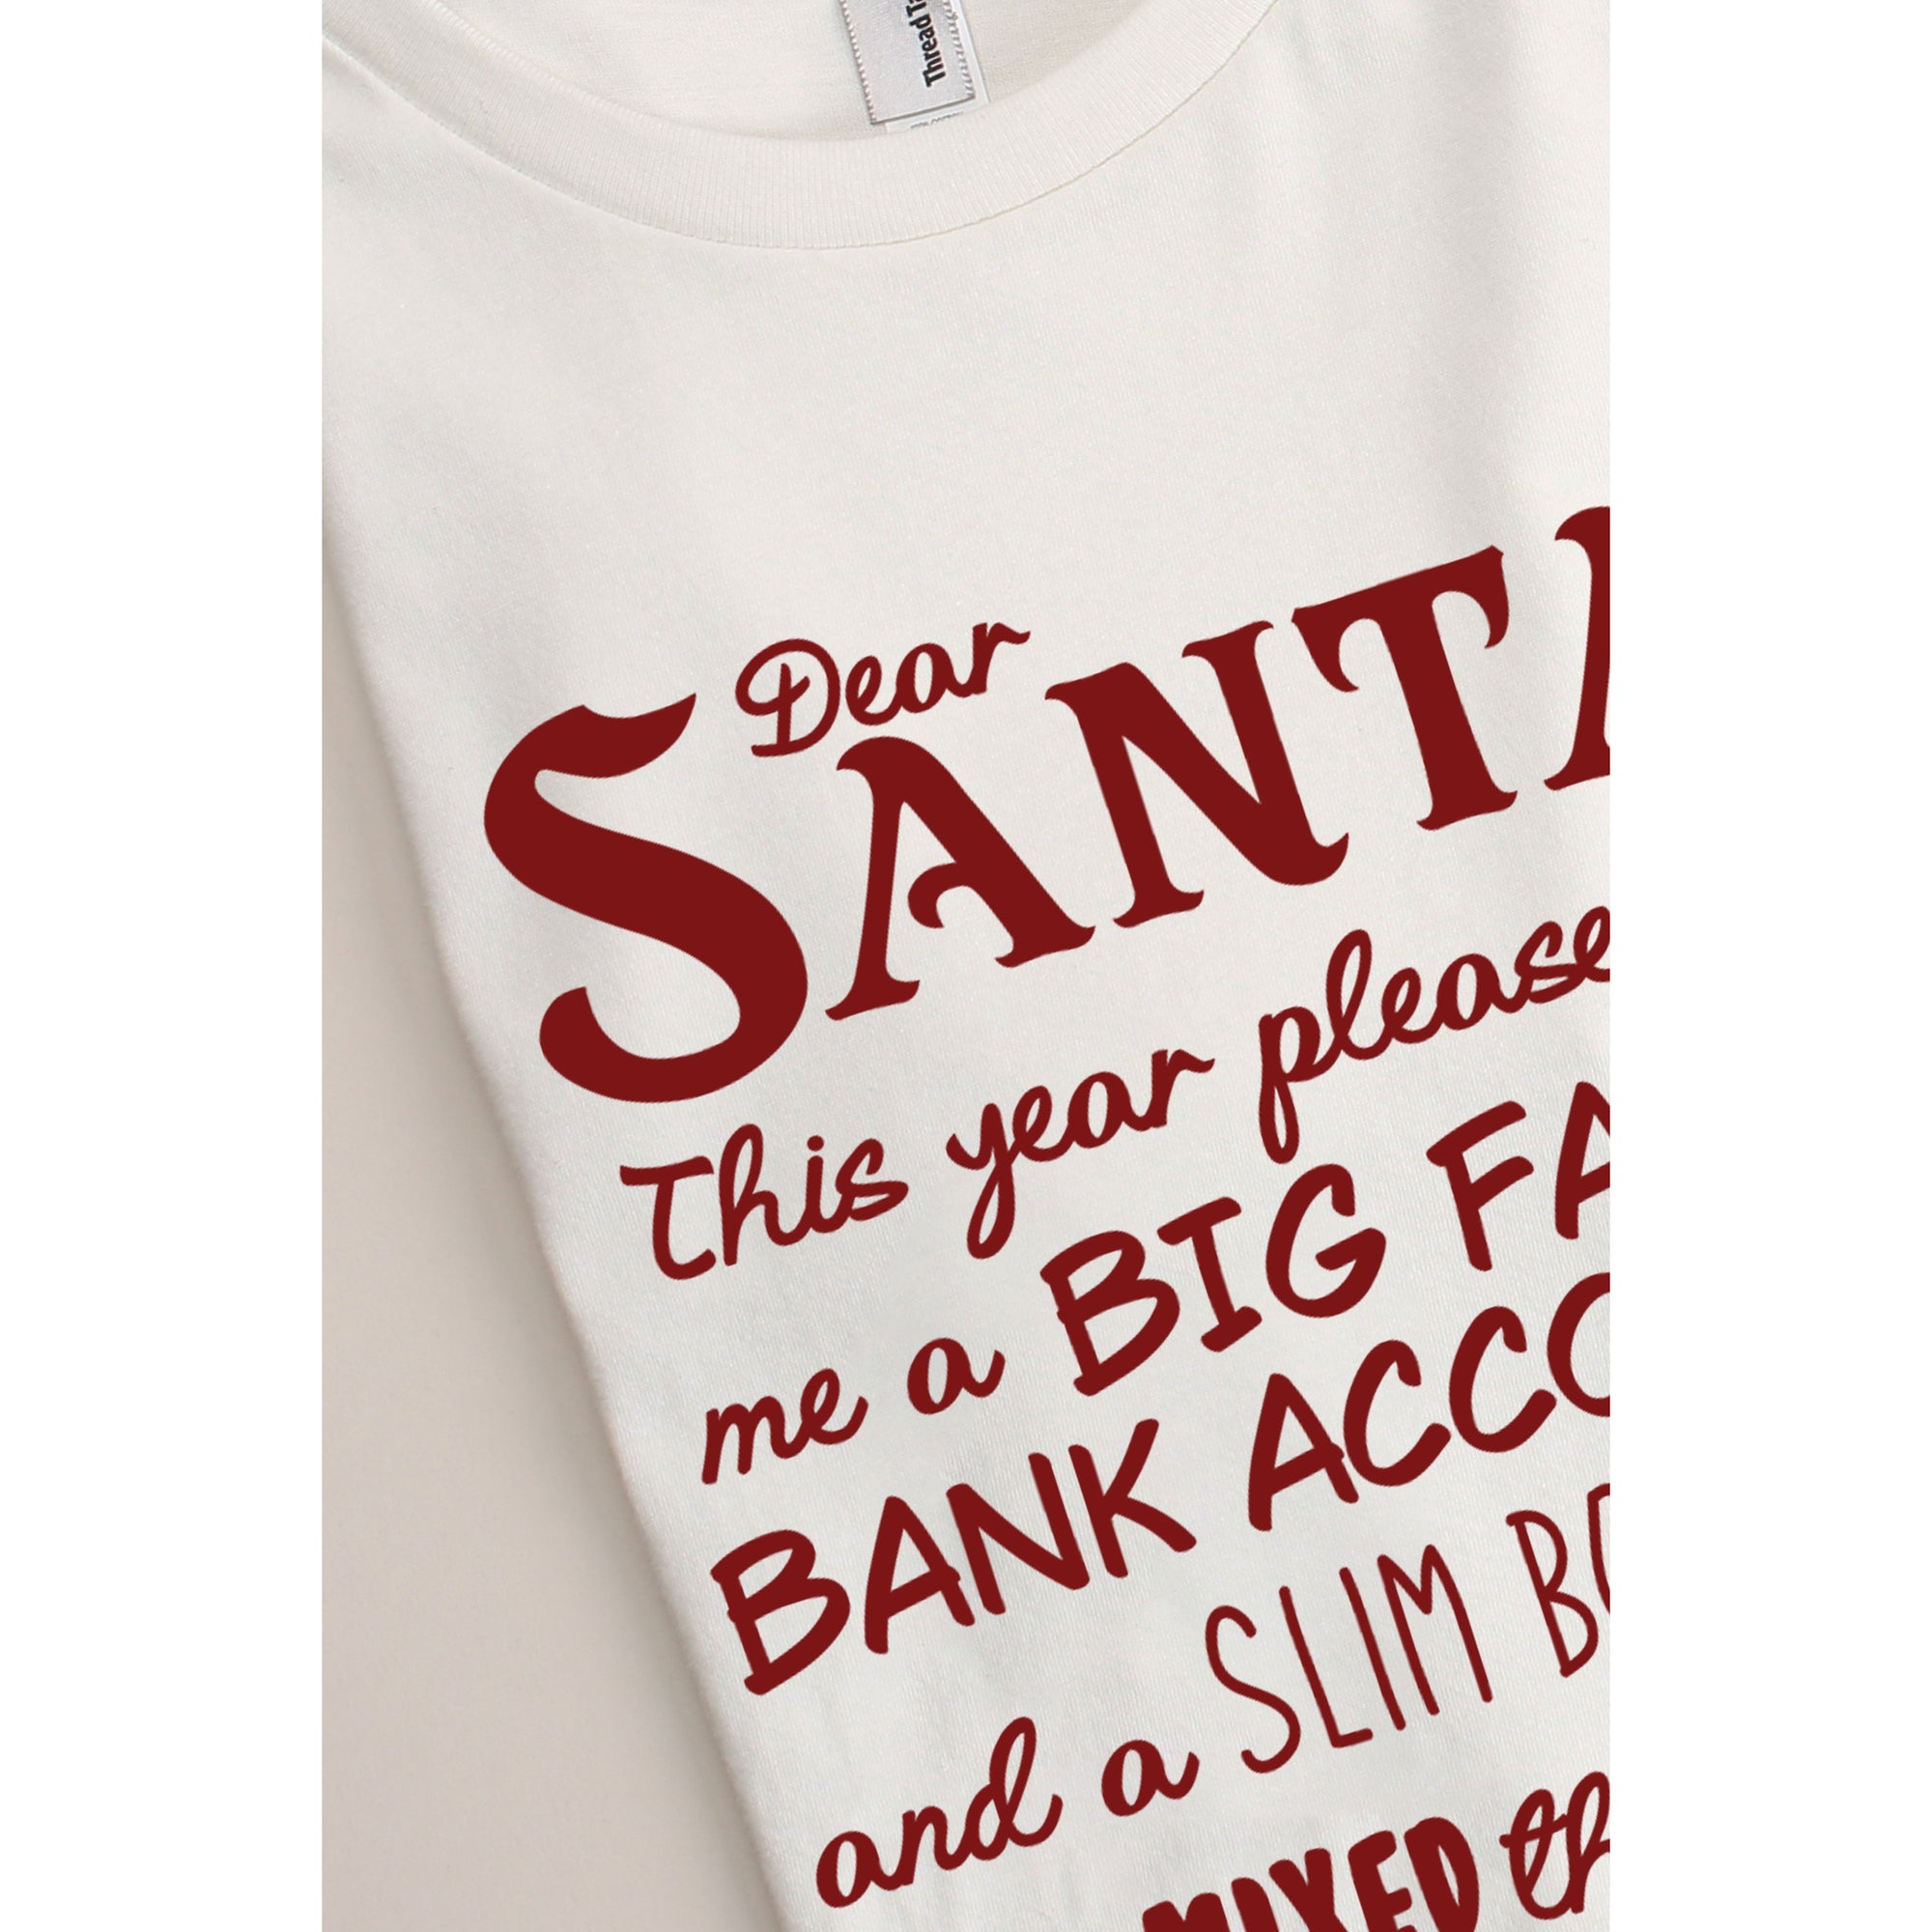 Dear Santa, This Year Please Give Me A Big Fat Bank Account And A Slim Body. You Mixed Those Two Up Last Year.